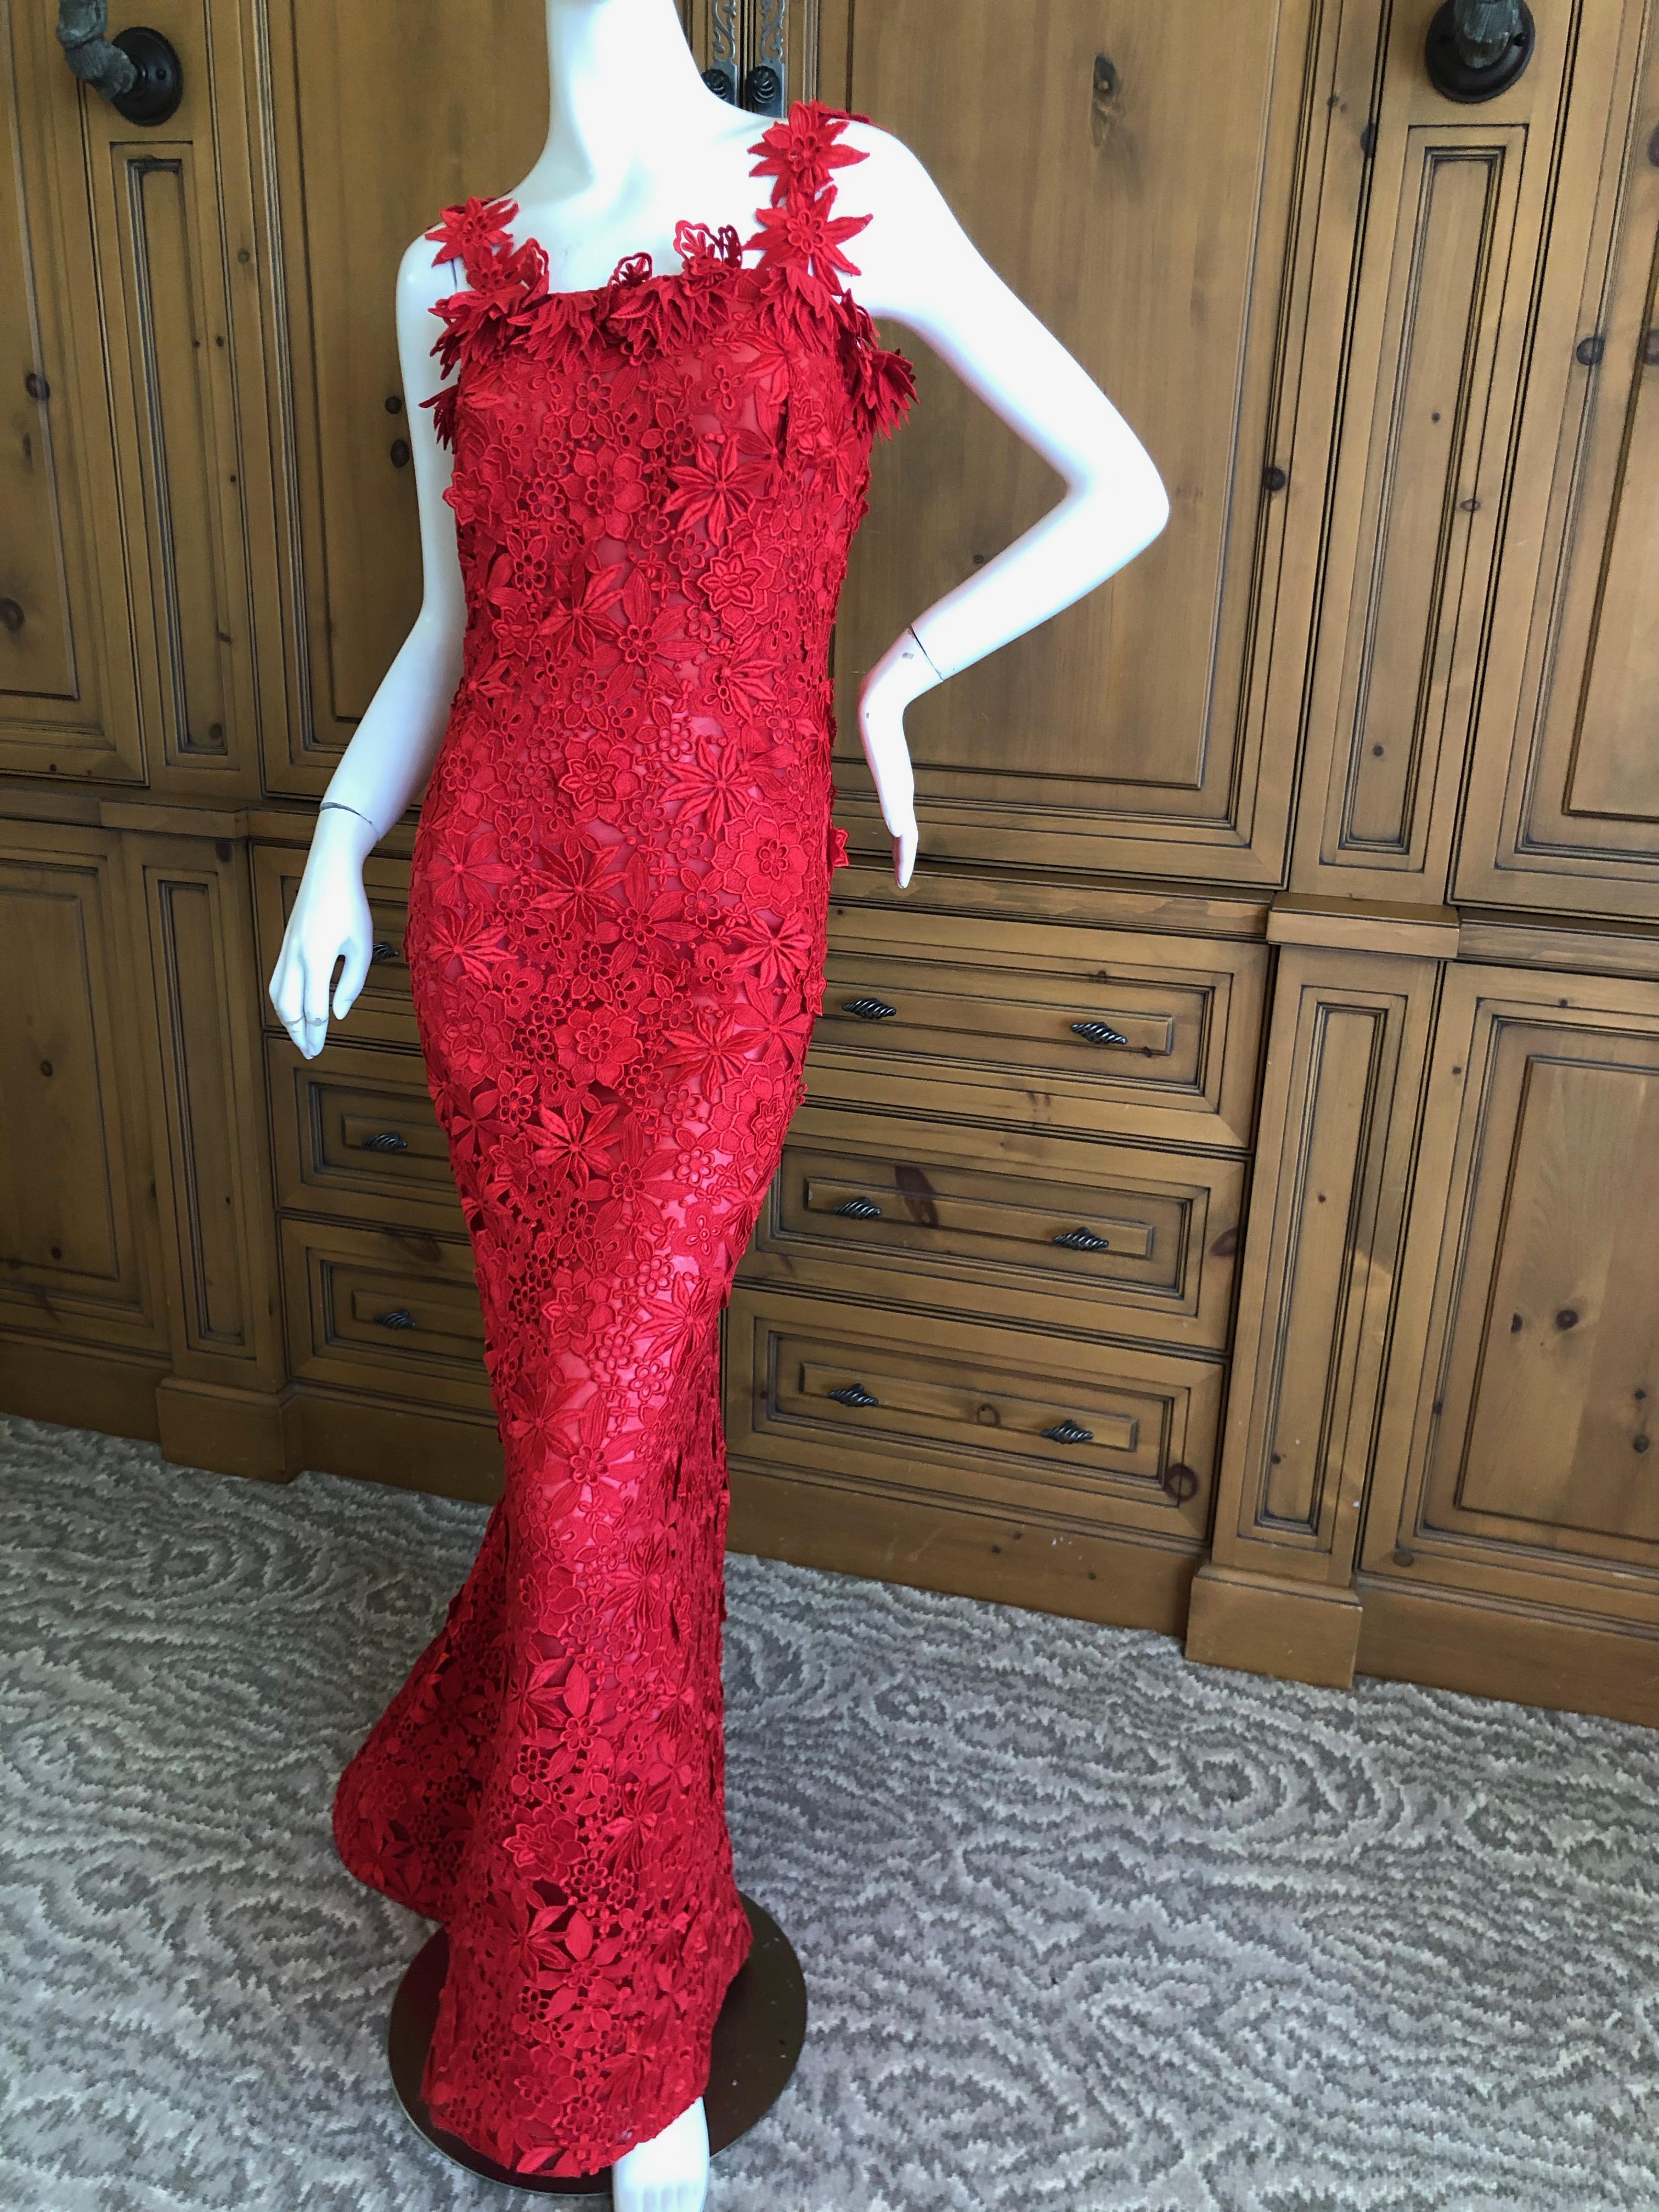 Oscar de la Renta Guipure Lace Strapless Evening Dress with Matching Mantilla Wrap
 Stunning. Please use the zoom feature to see all the remarkable details.
Size 14
 Bust 39